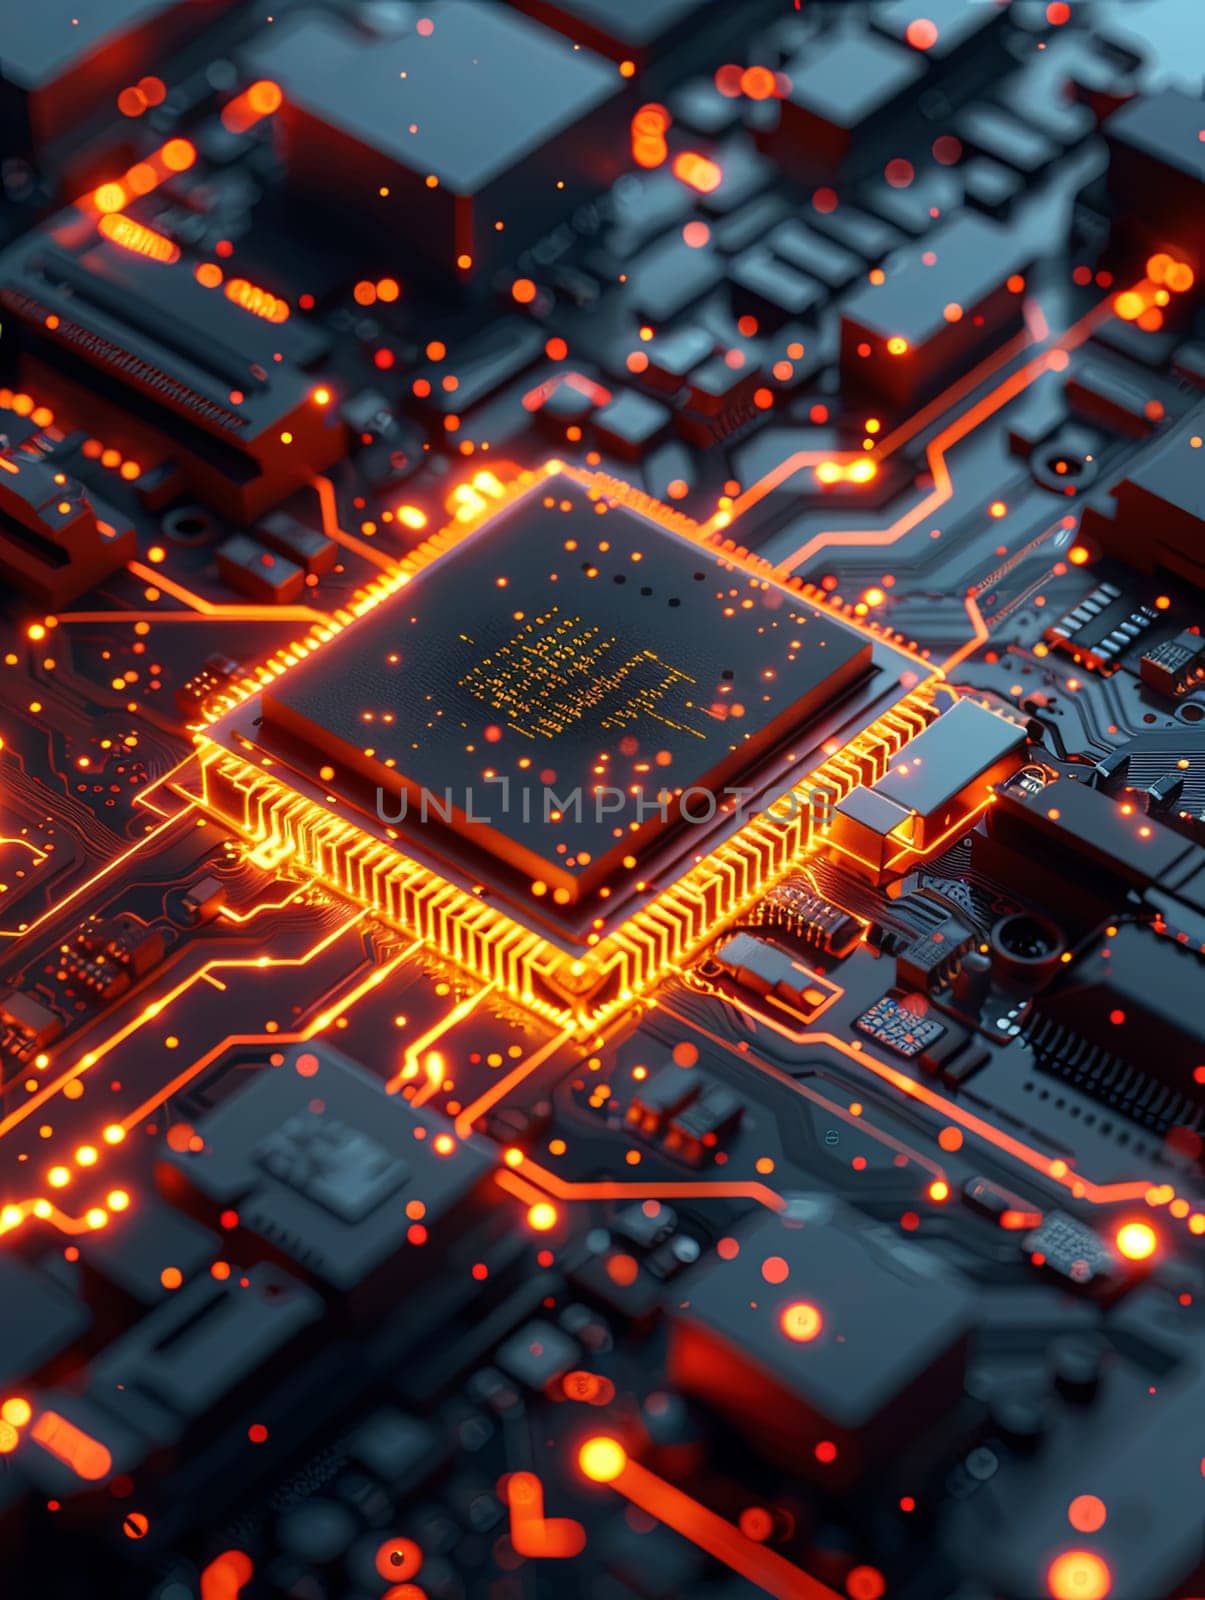 A close-up shot of a modern microprocessor or chip, illuminated by glowing data streams, set against a black motherboard background.